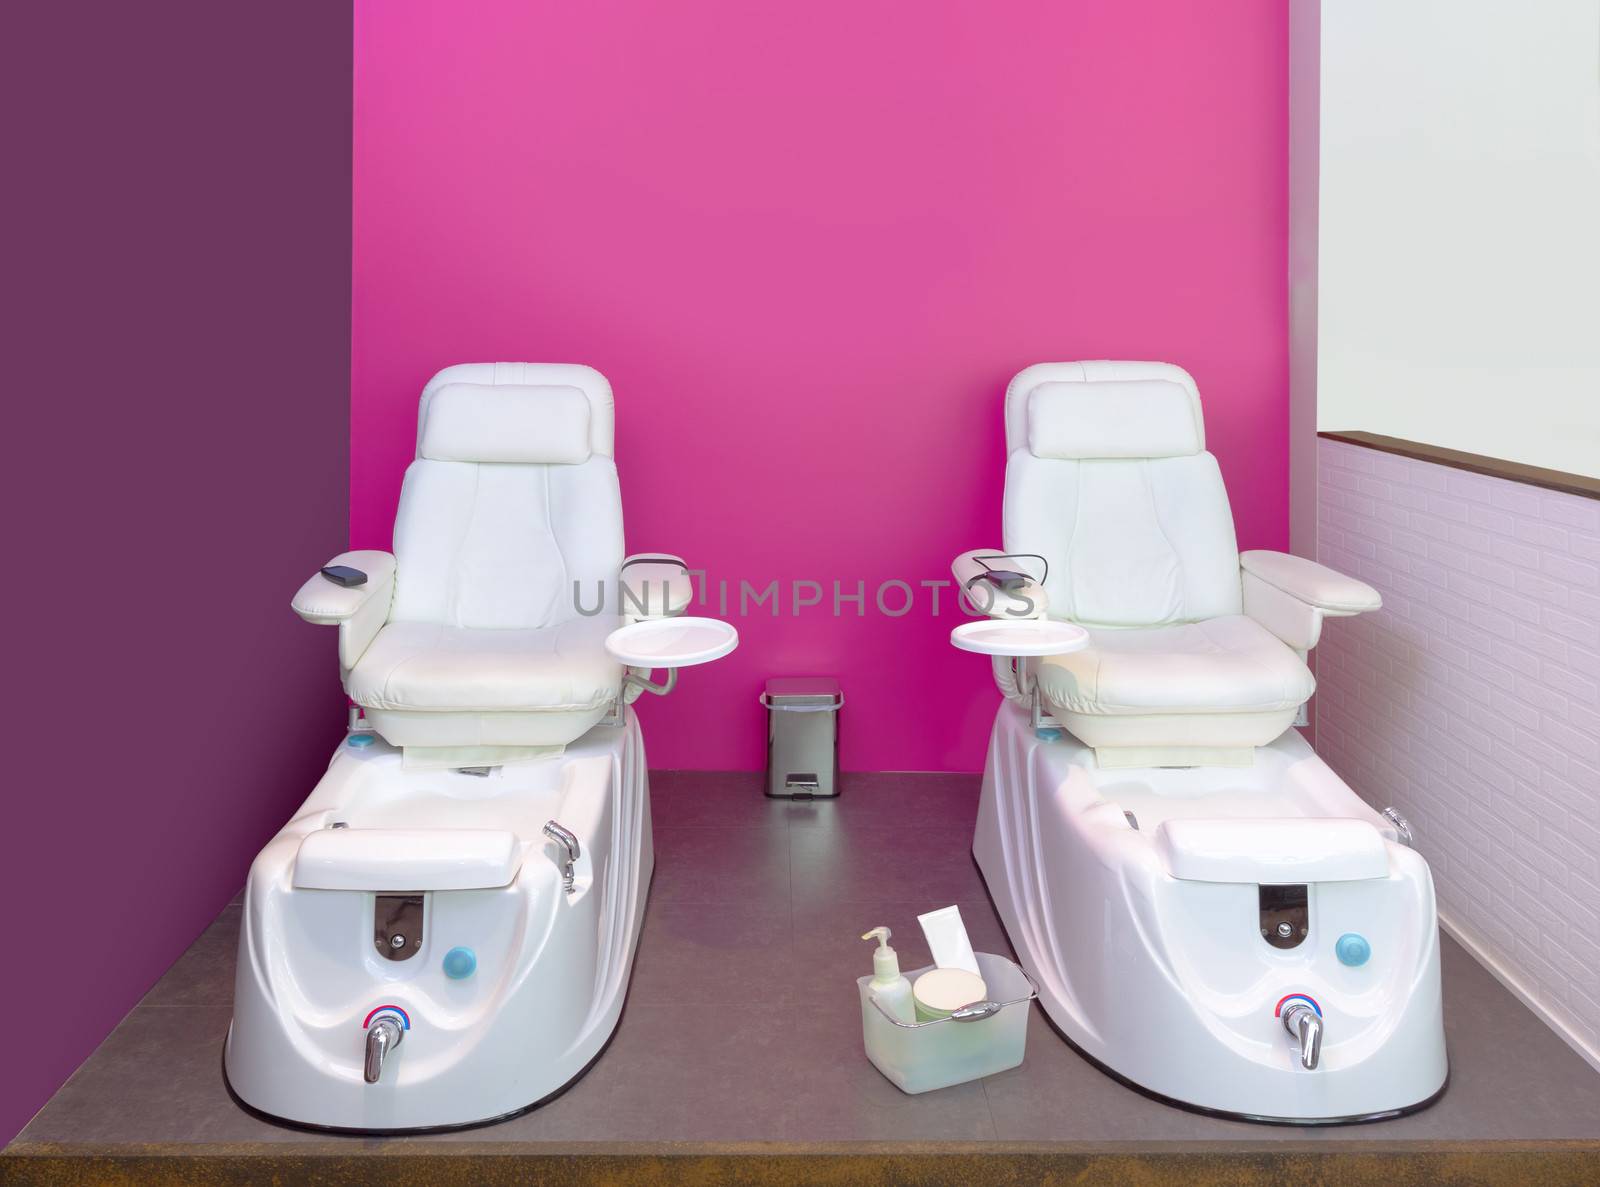 Nail saloon Pedicure chair spa furniture in pink purple wall